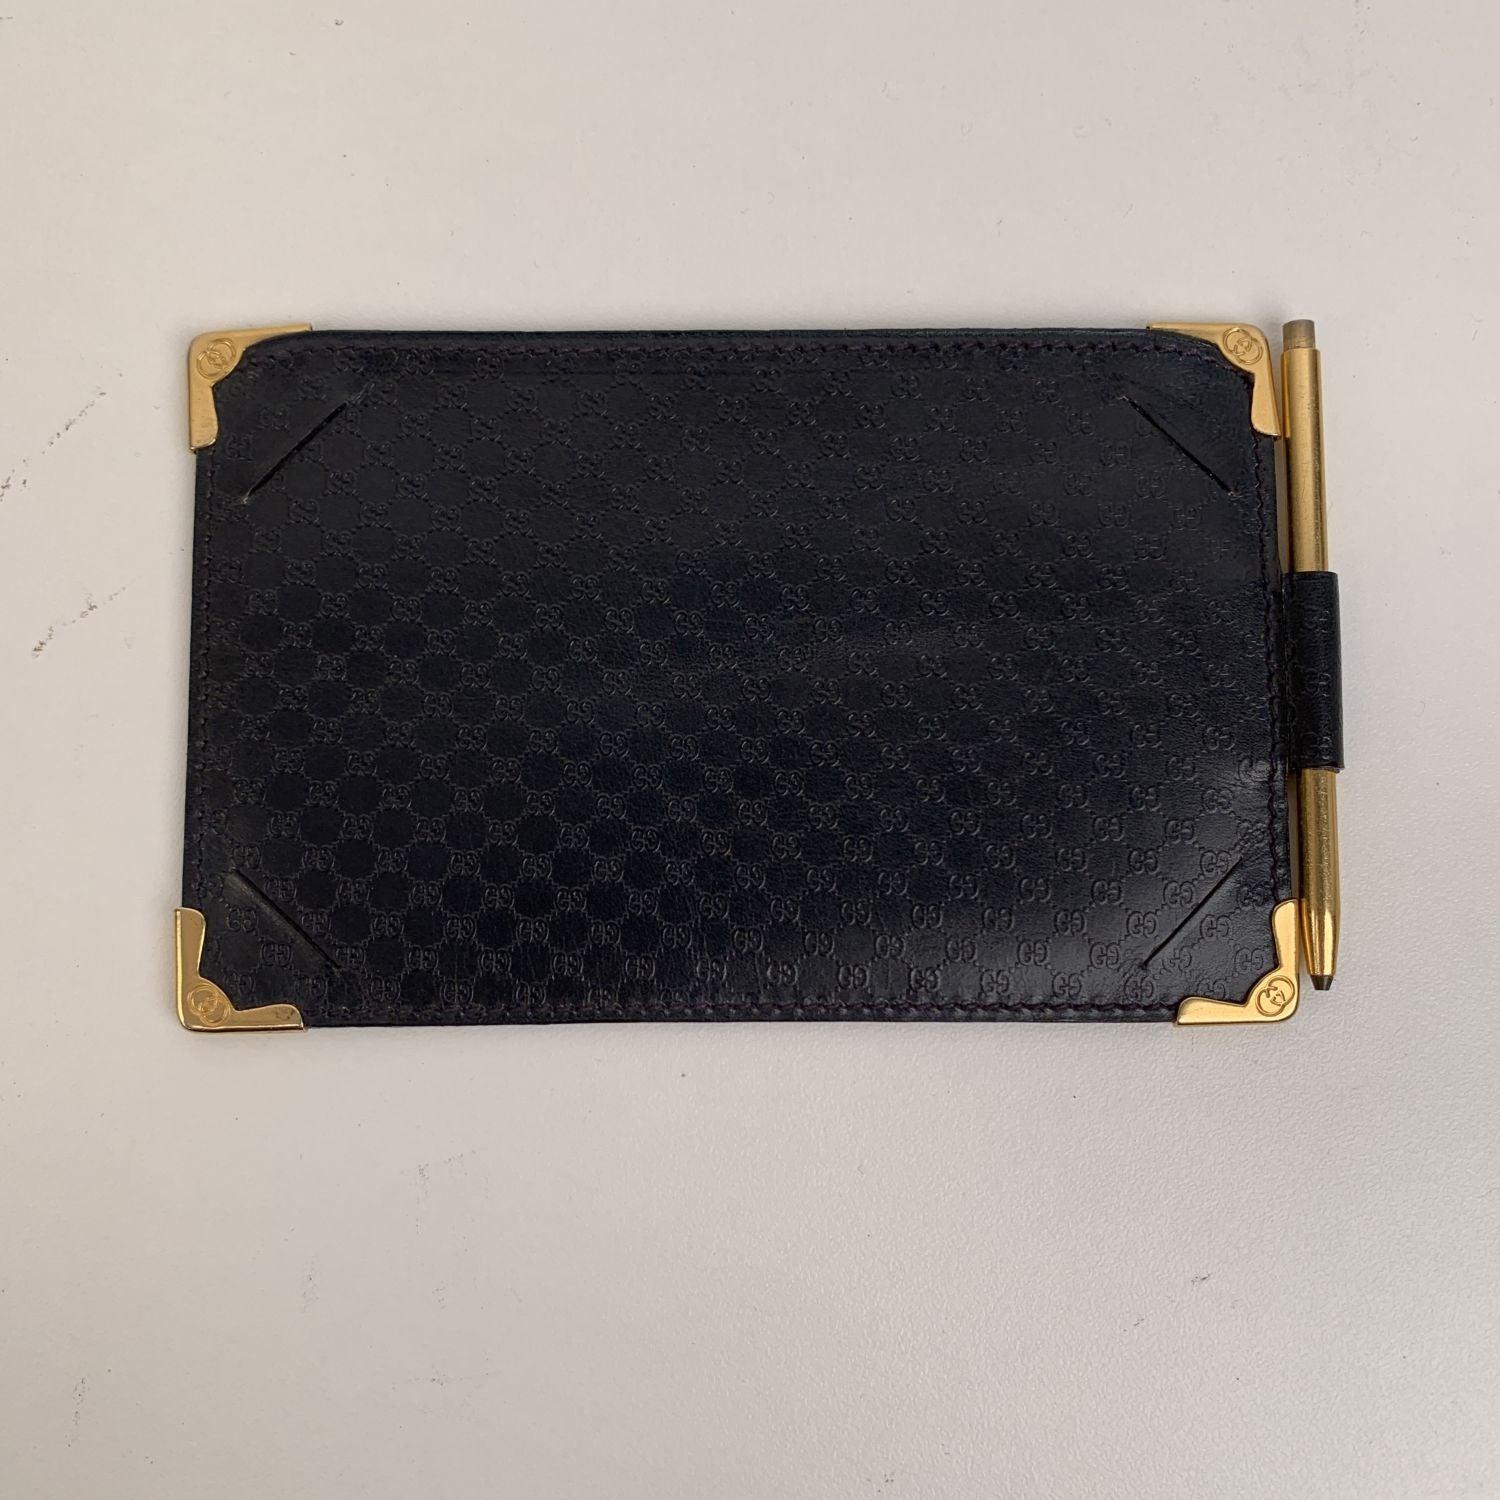 Vintage GUCCI Document Holder or wallet with gold metal mechanical pen. It is crafted in navy blue leather with embossed GG monogram pattern. Gold metal corners with engraved GG logo. it features 1 main compartment for paper or money and 4 front